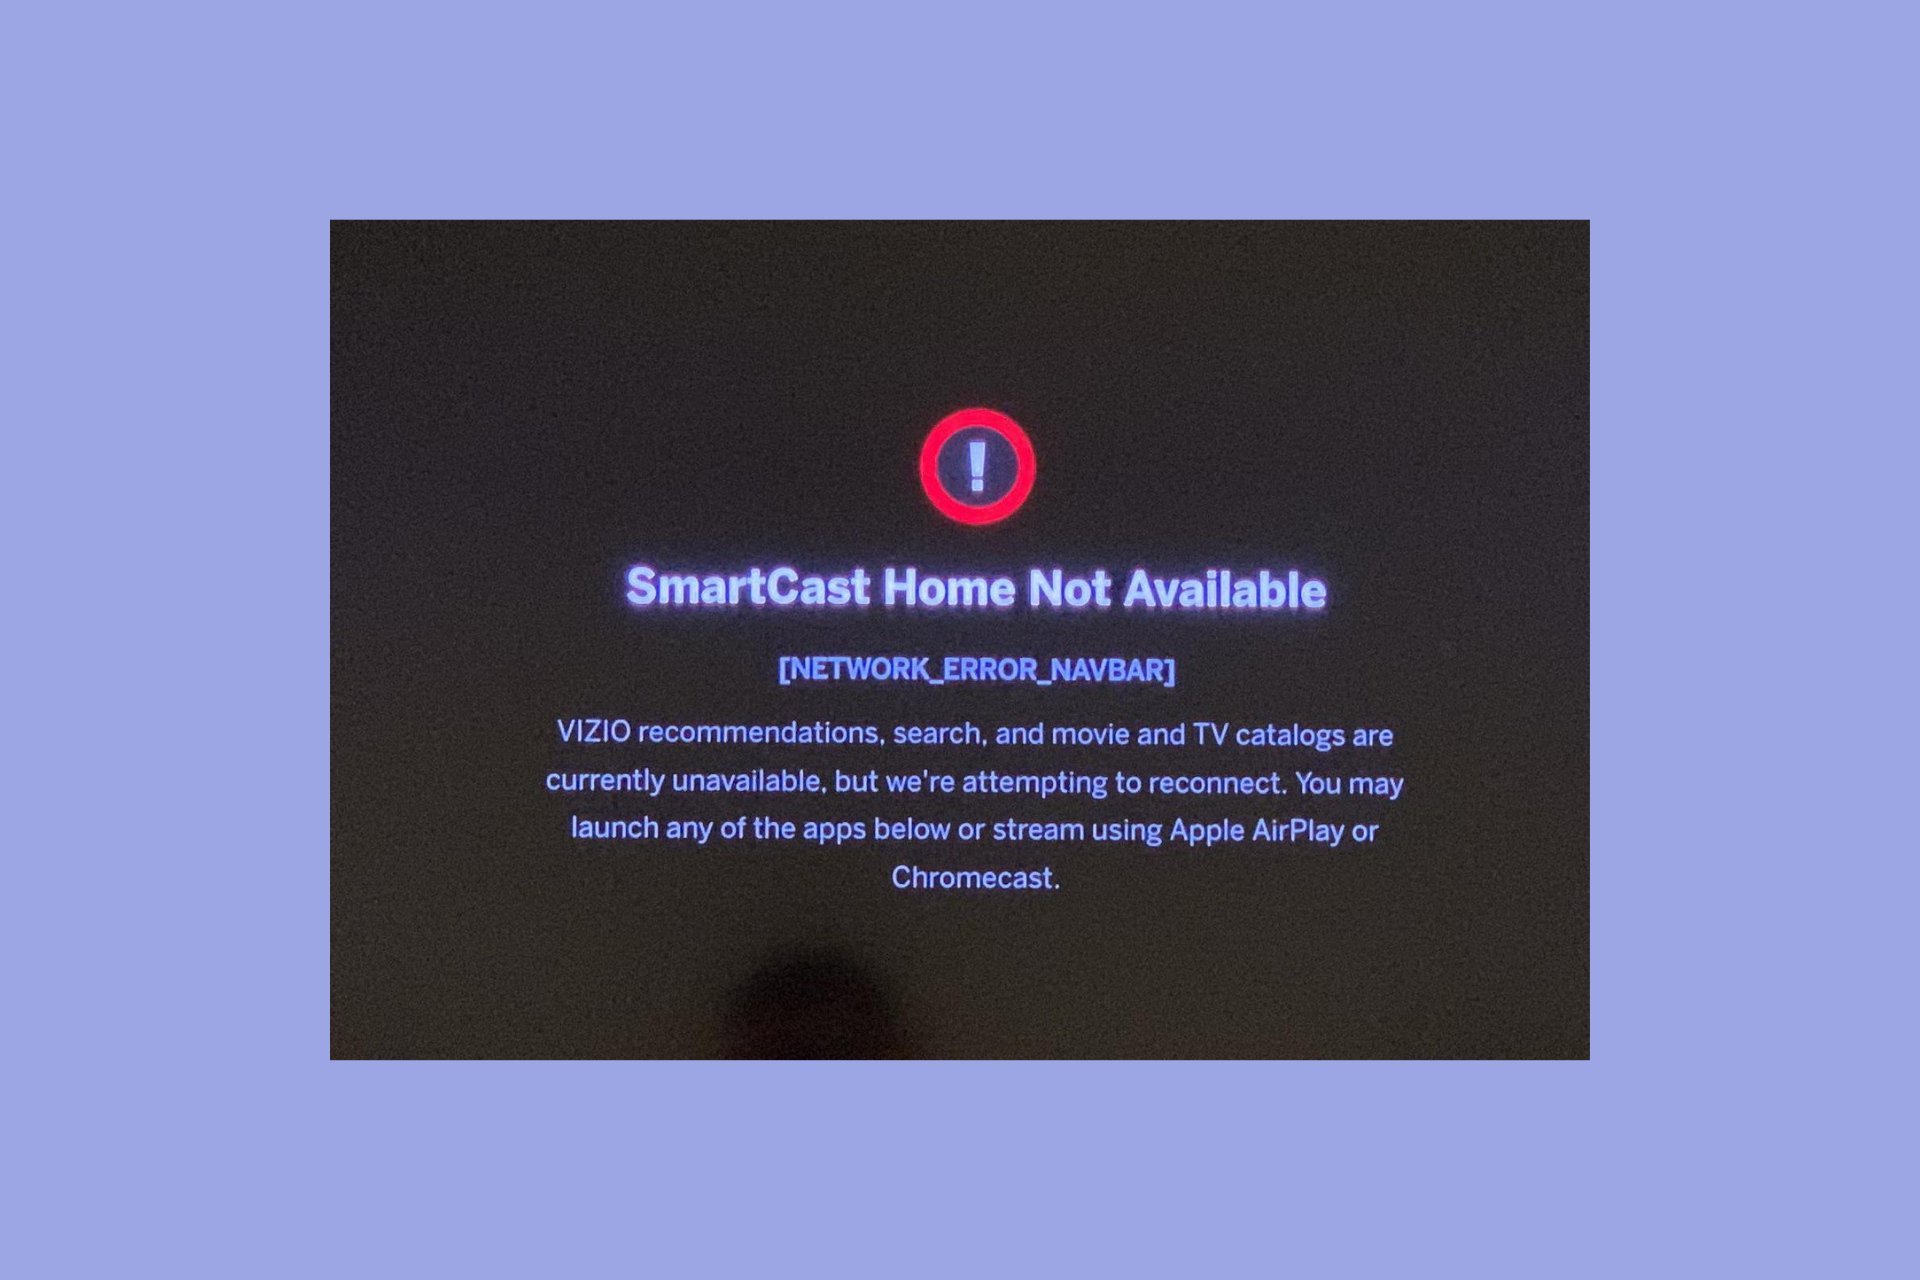 What to do if SmartCast Home is not available